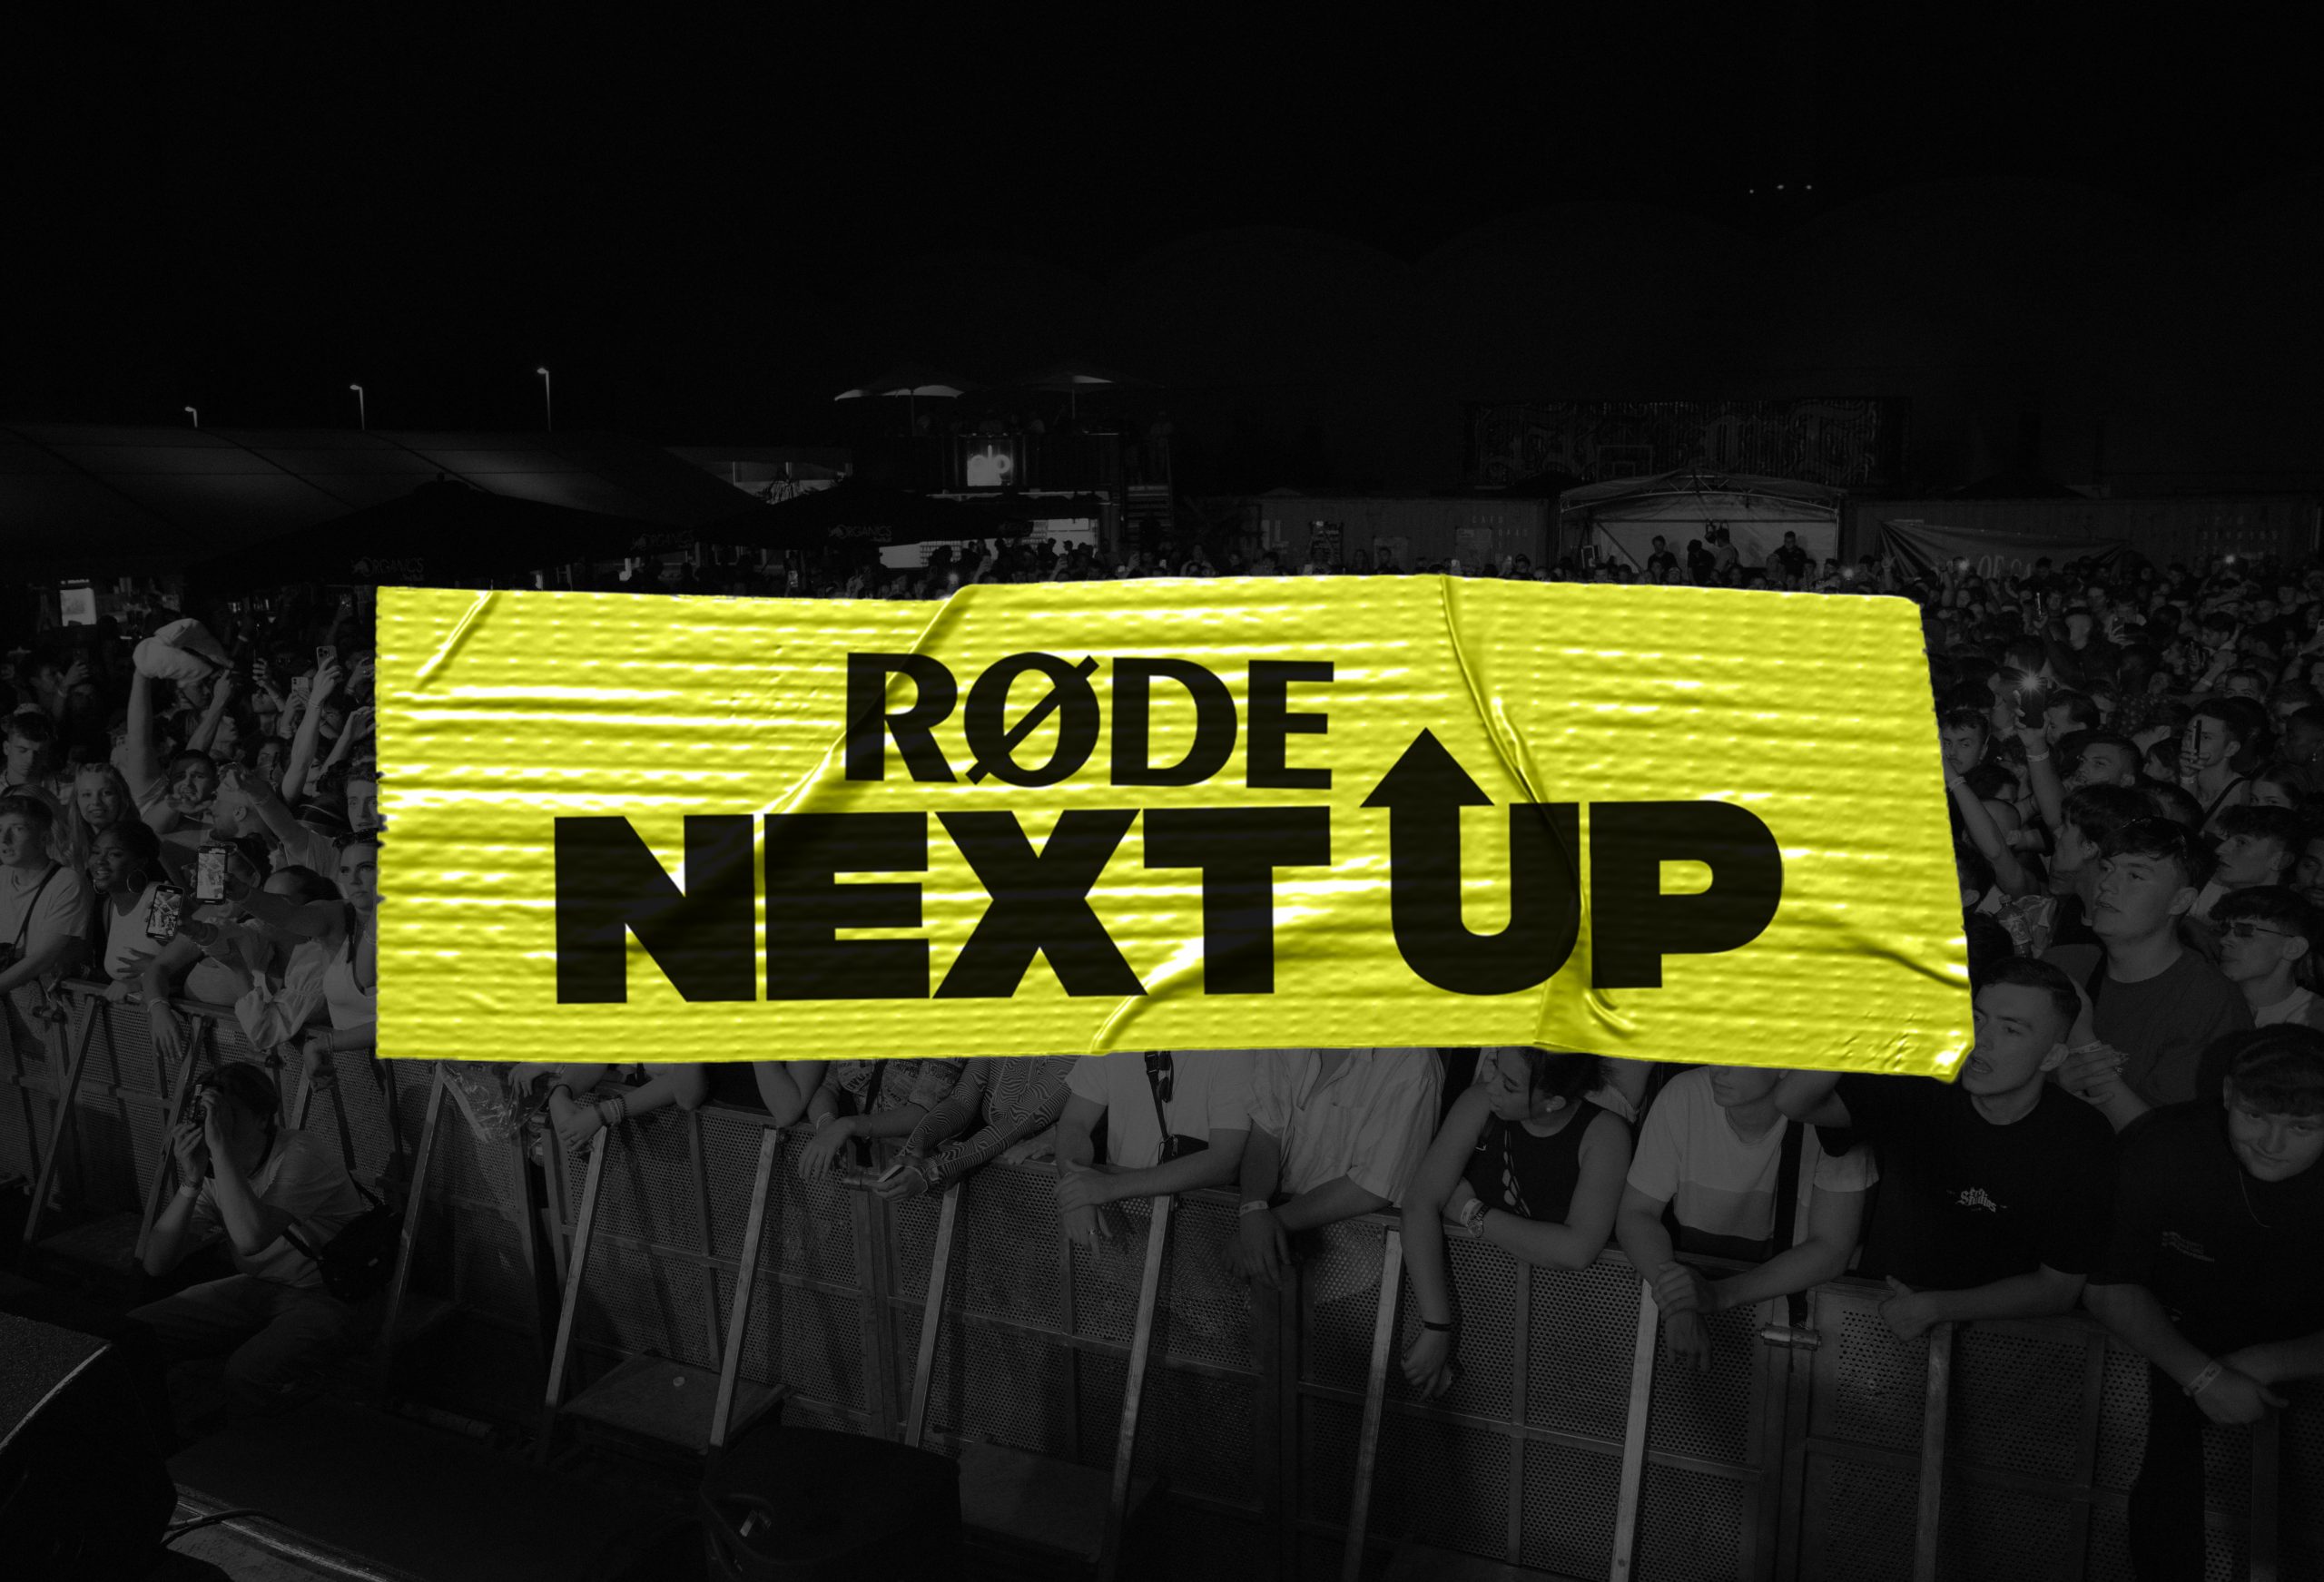 RODE NEXTUP newcomer contest